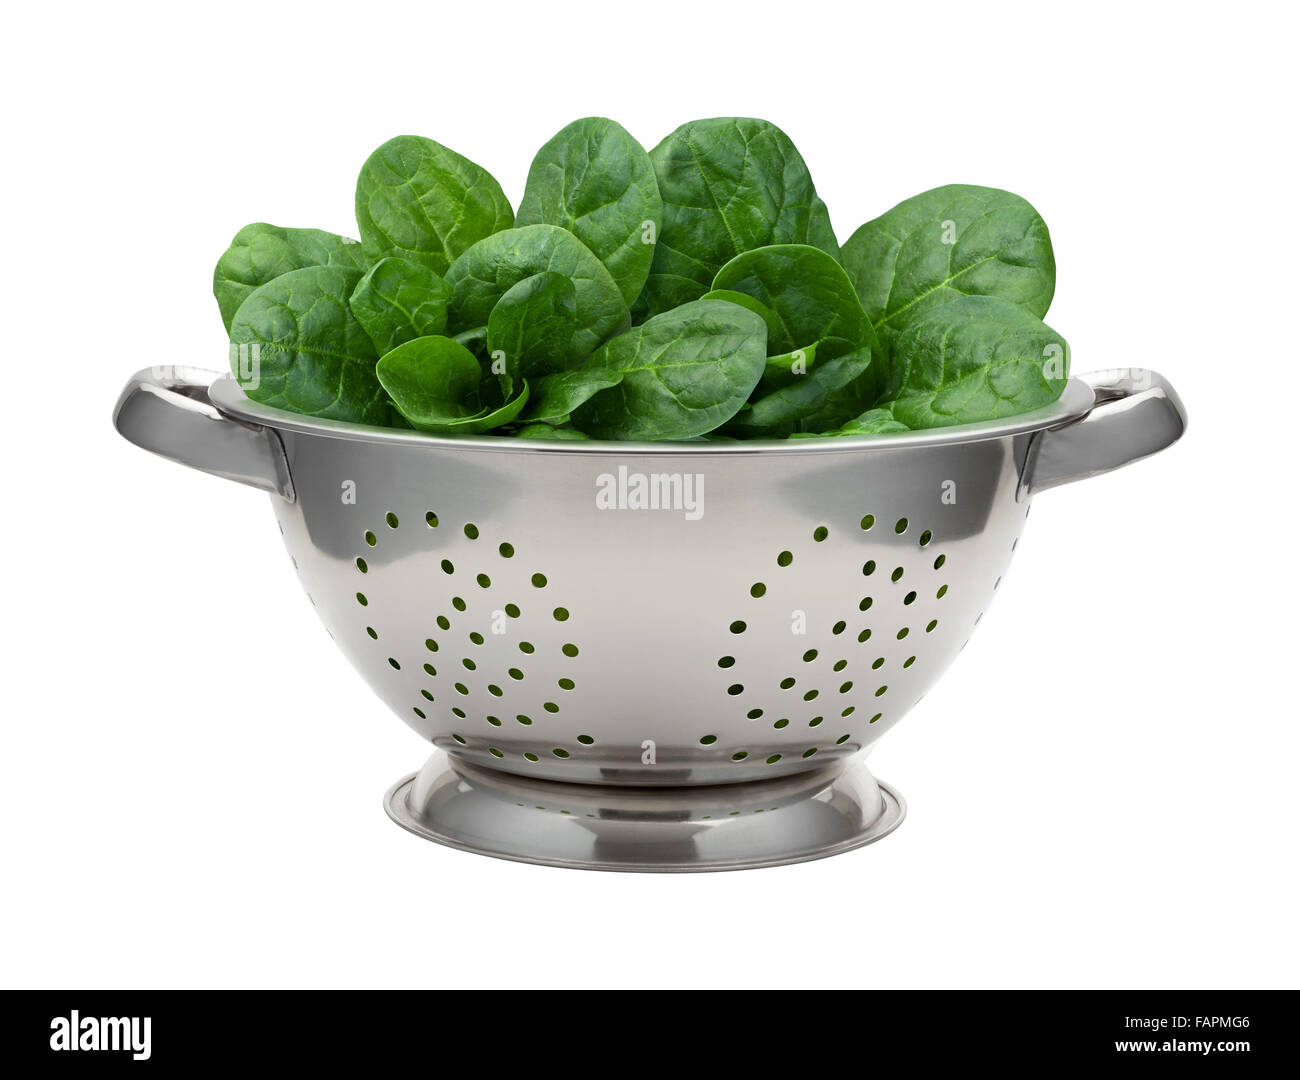 Fresh Spinach in a Stainless Steel Colander. The image is a cut out, isolated on a white background. Stock Photo